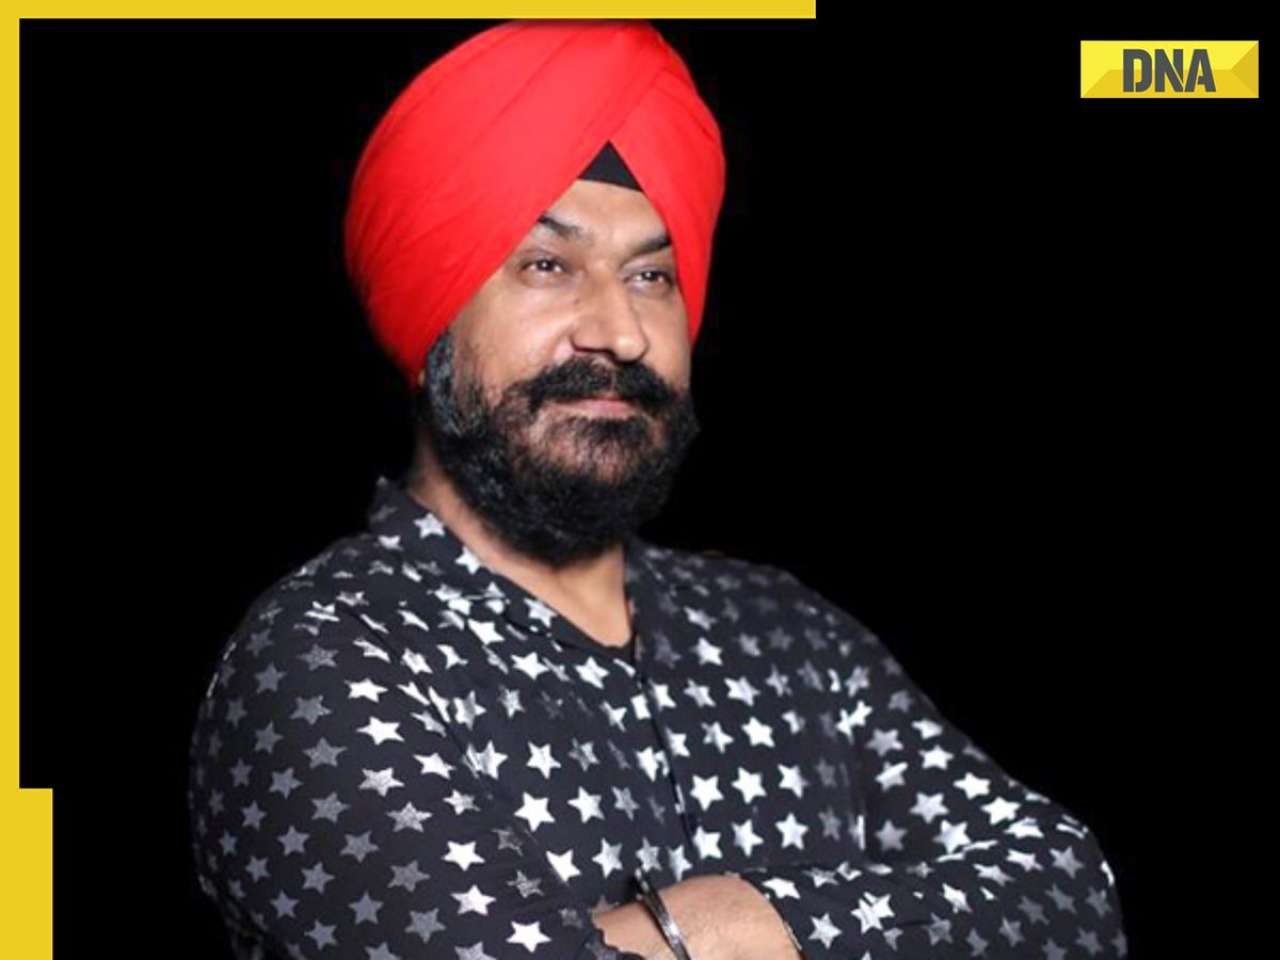 Gurucharan Singh missing case investigation reaches Mumbai; TMKOC cast, actor's family, friends to be questioned